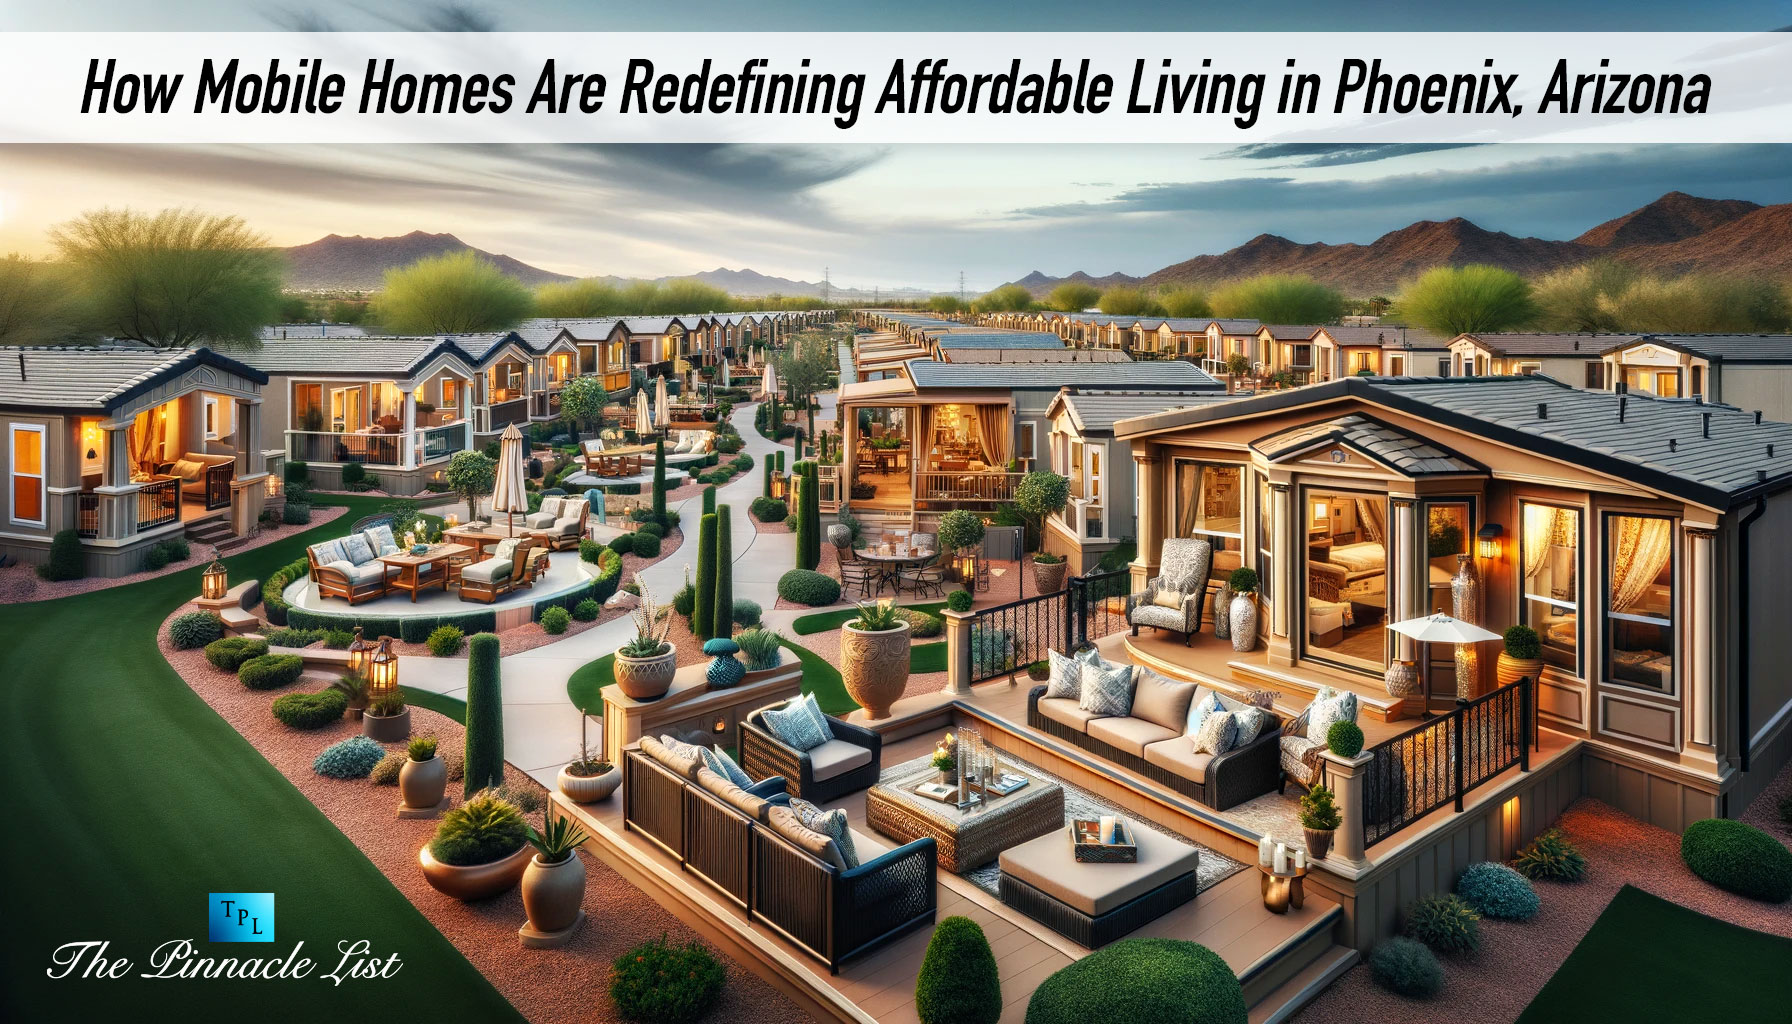 How Mobile Homes Are Redefining Affordable Living in Phoenix, Arizona